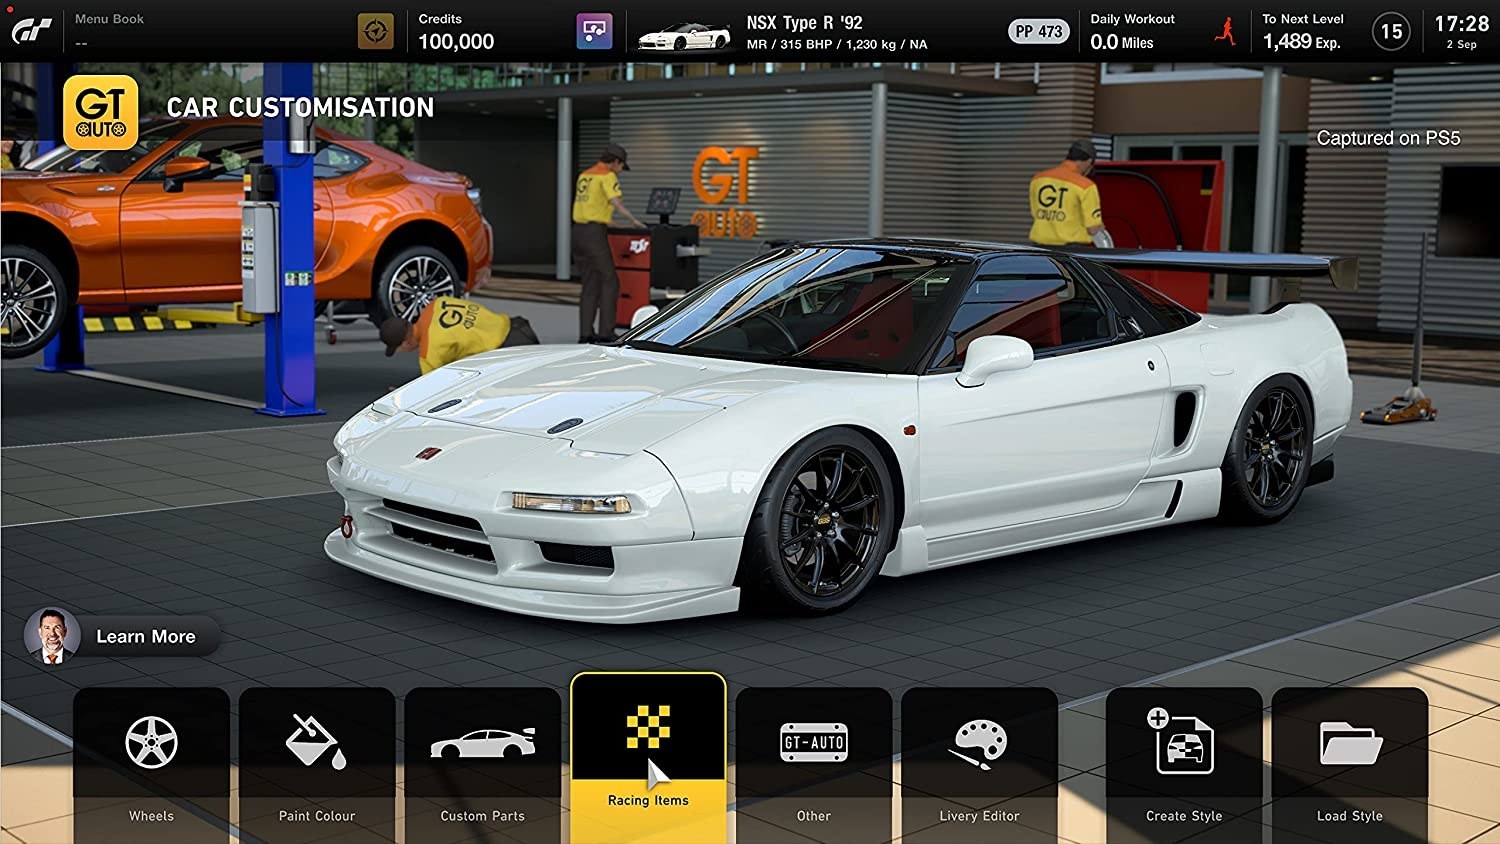 an image of a white sports car in the game